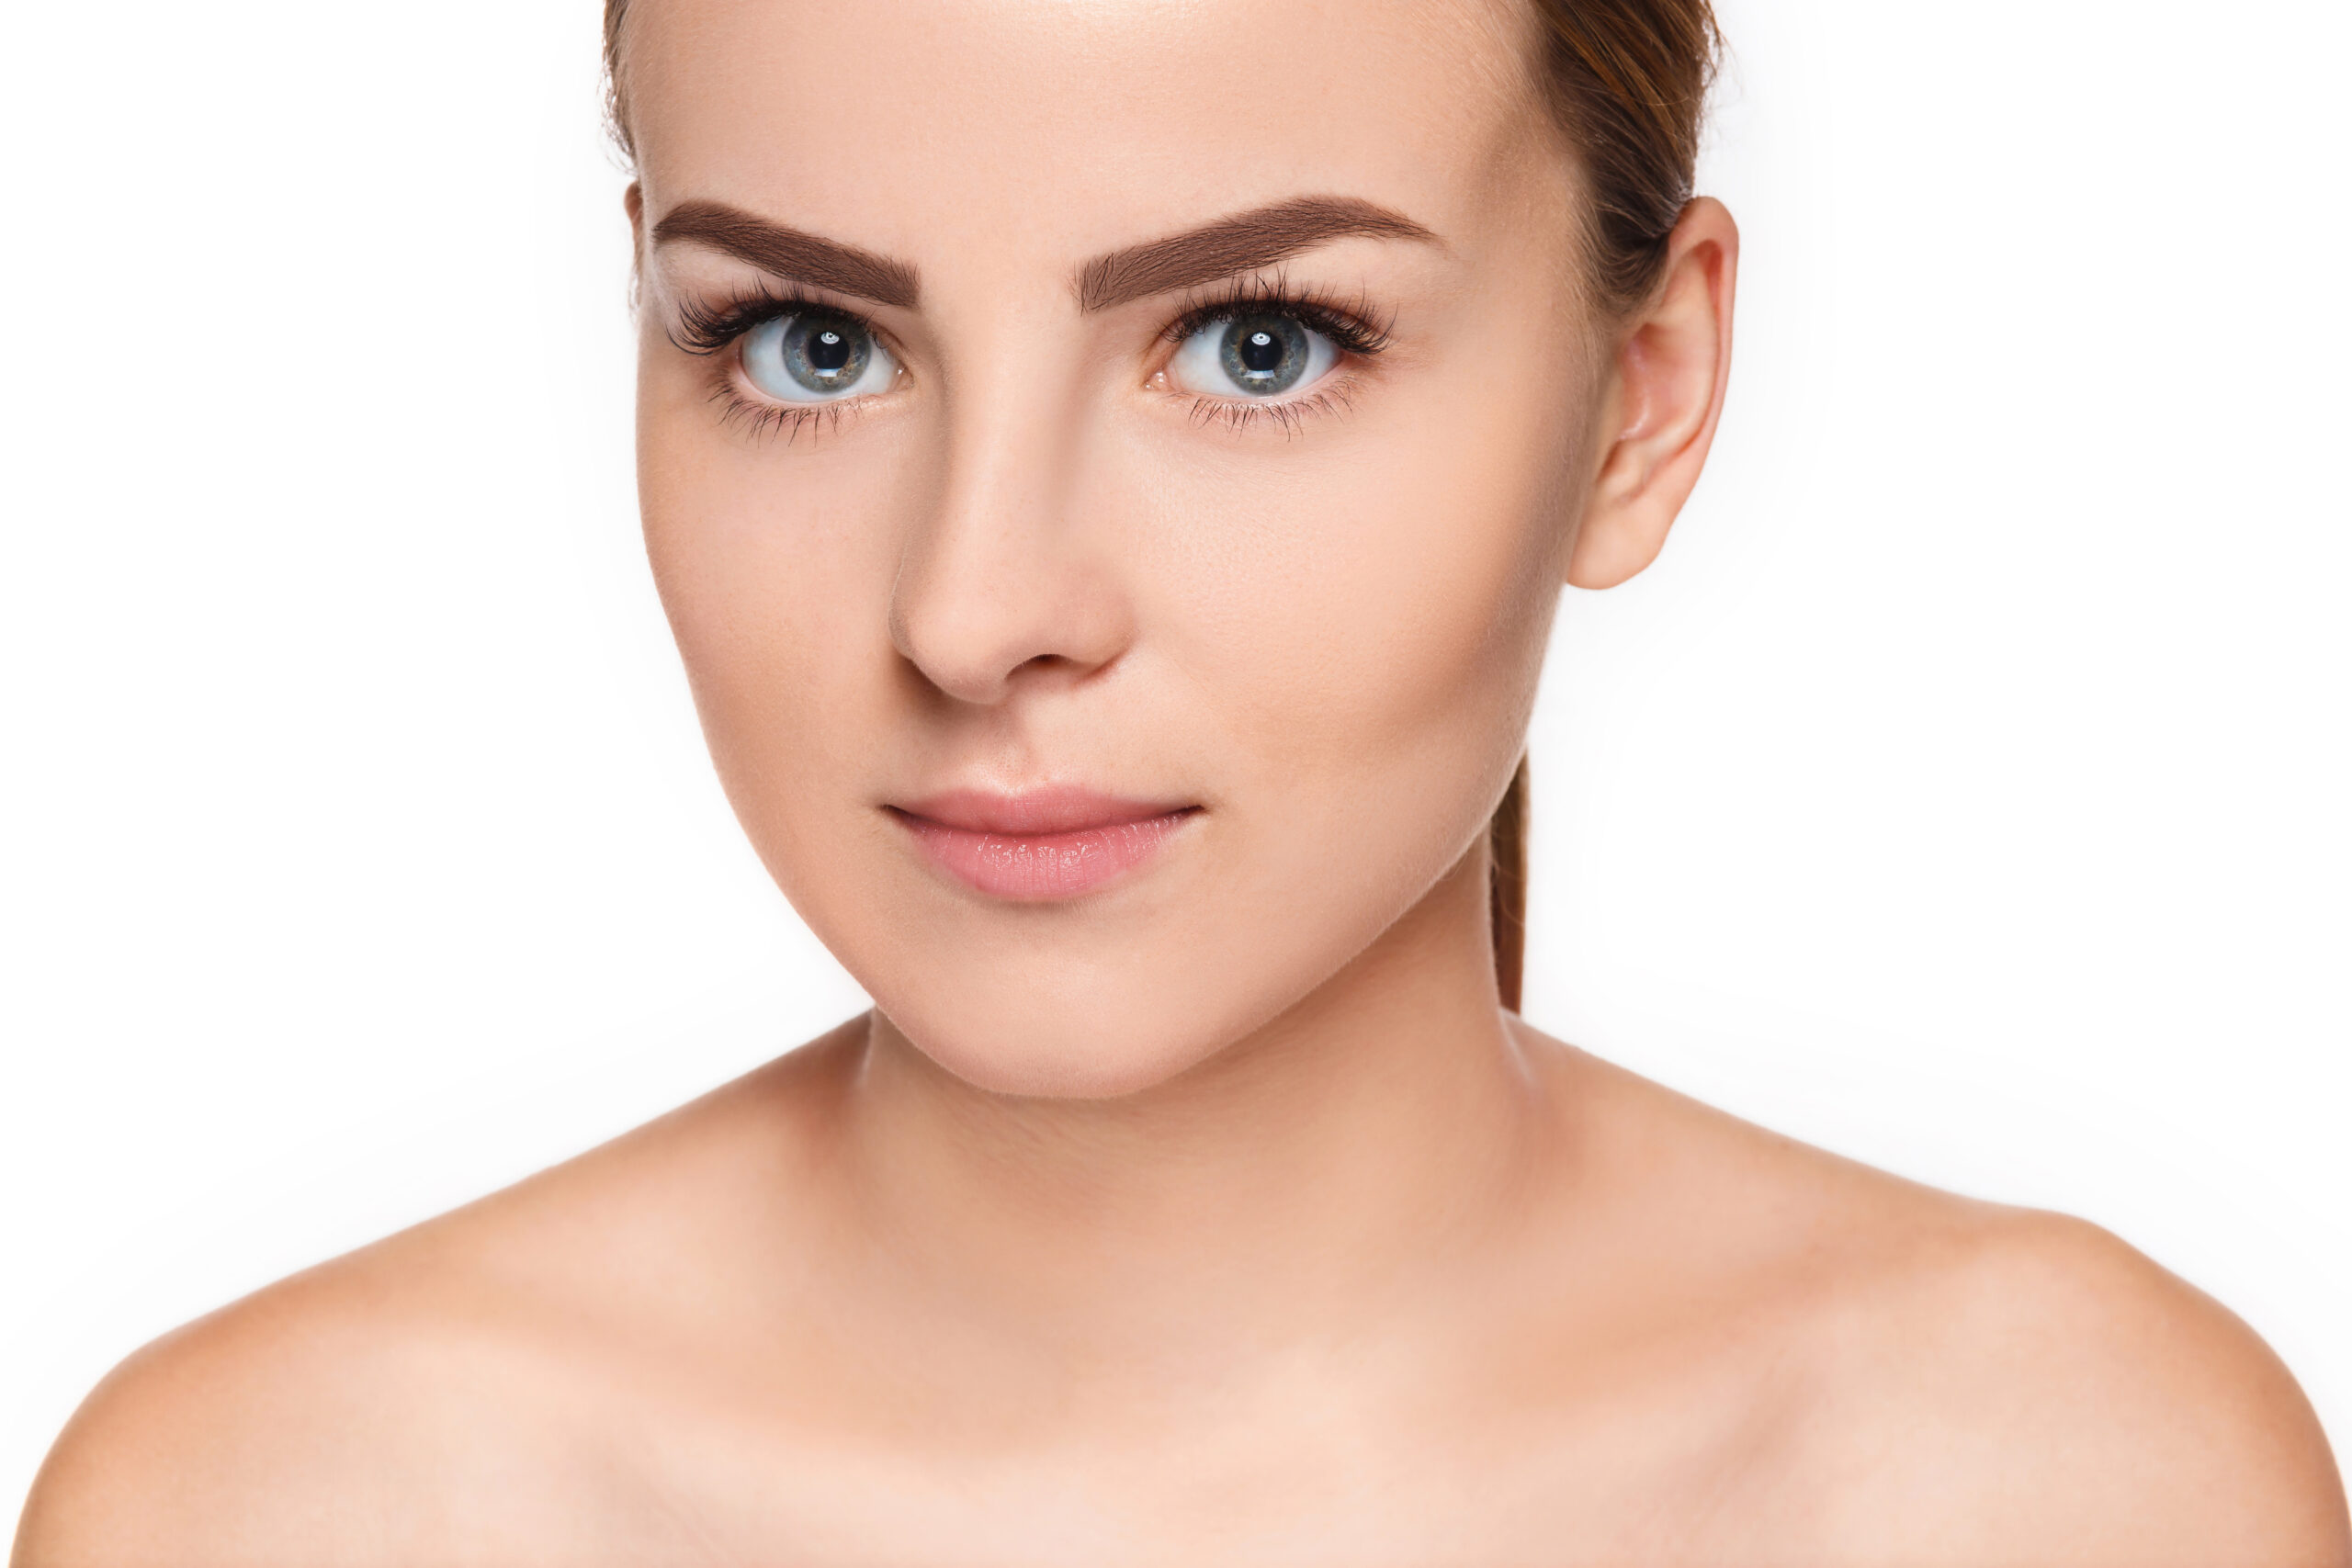 The beautiful face of young woman with cleanf fresh skin